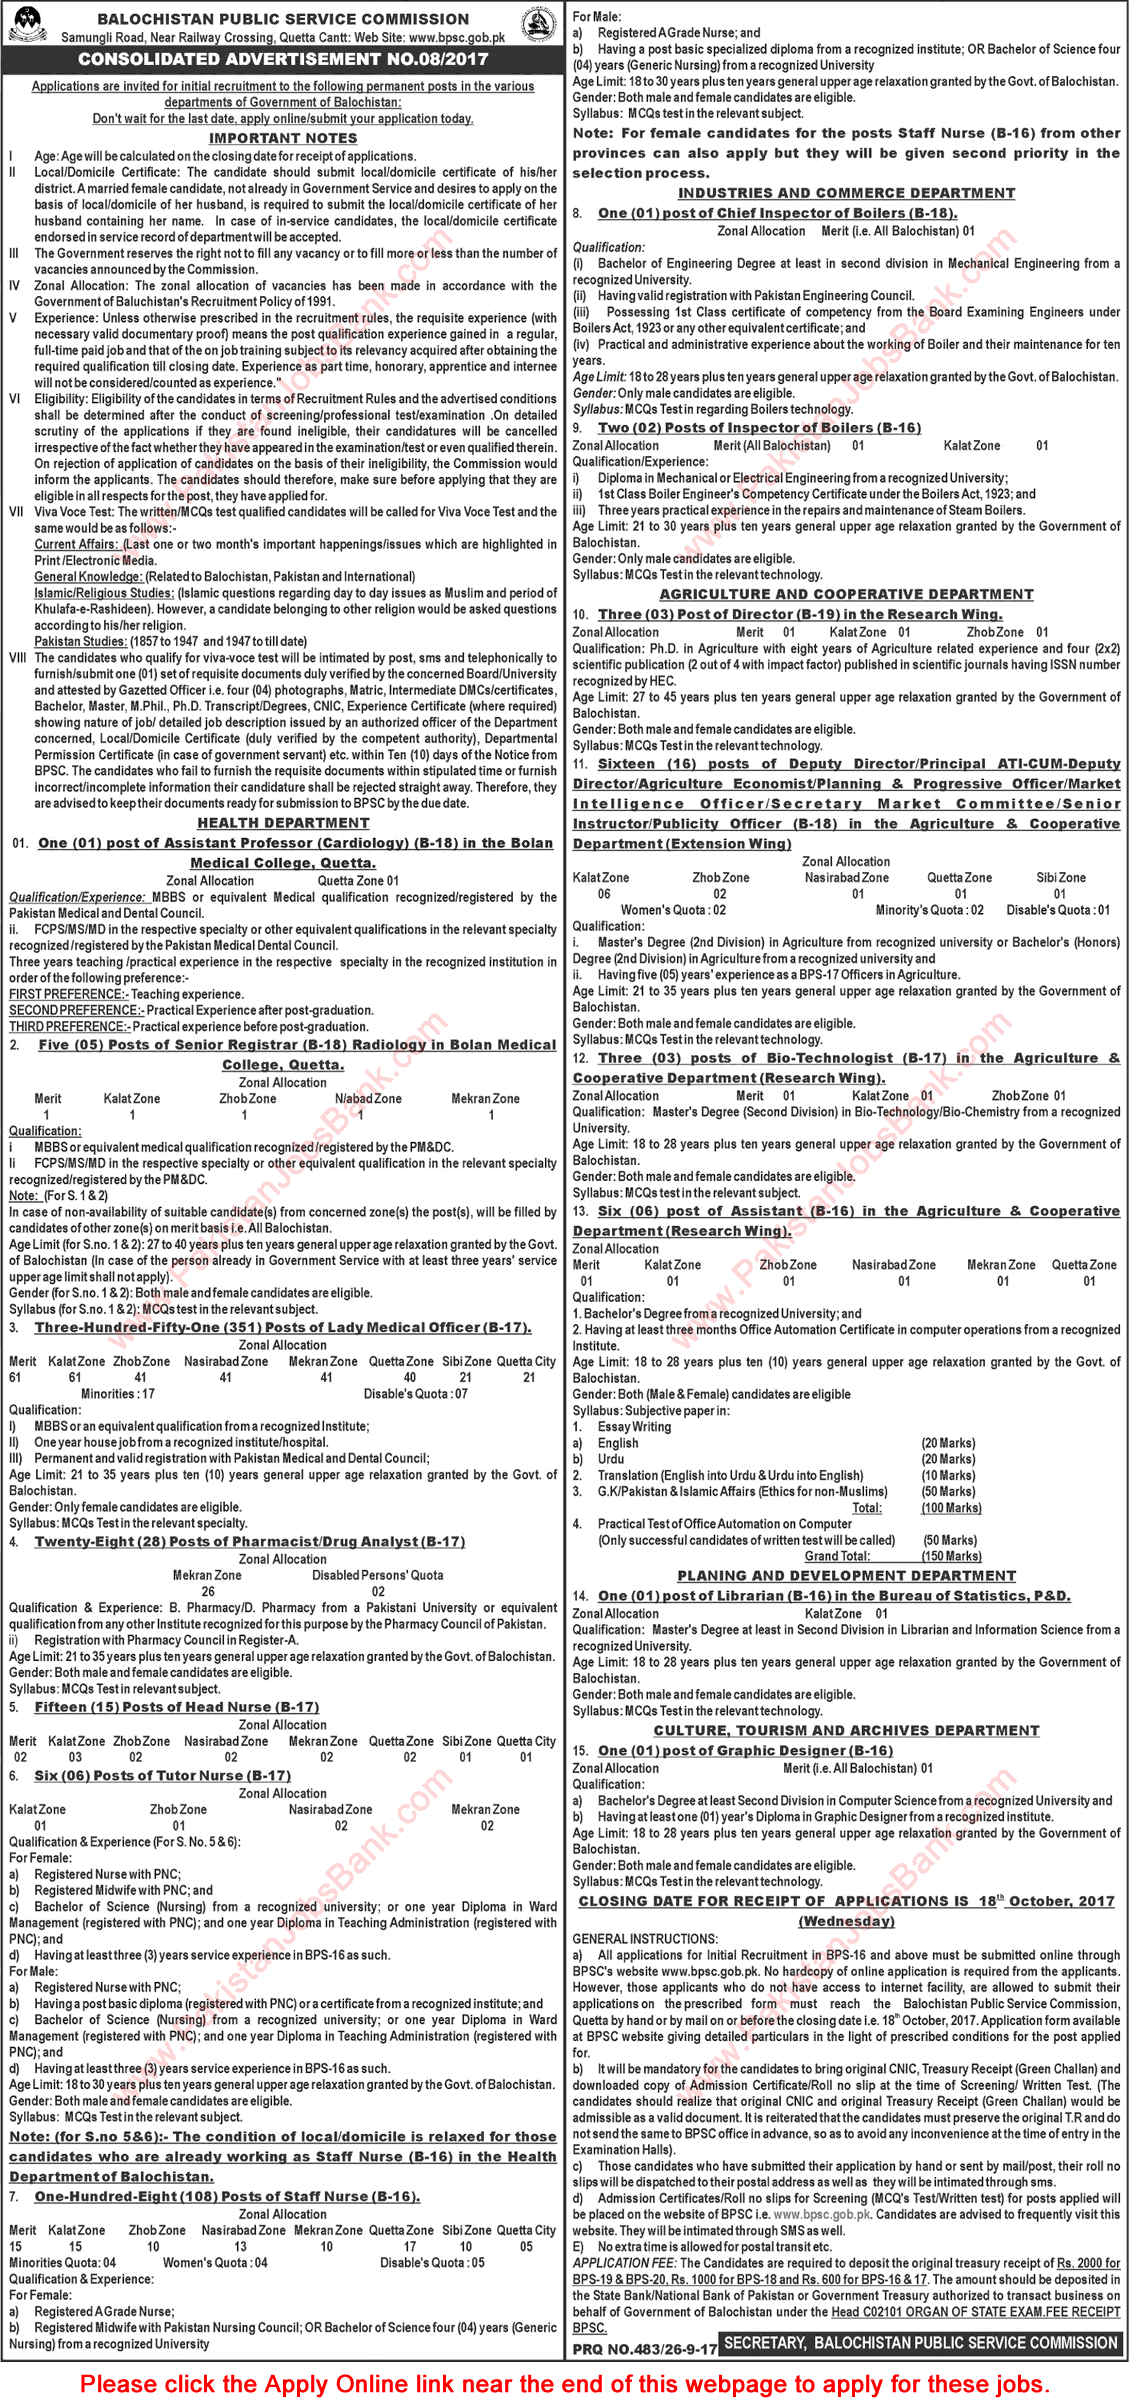 BPSC Jobs September 2017 Apply Online Consolidated Advertisement No 08/2017 8/2017 Latest